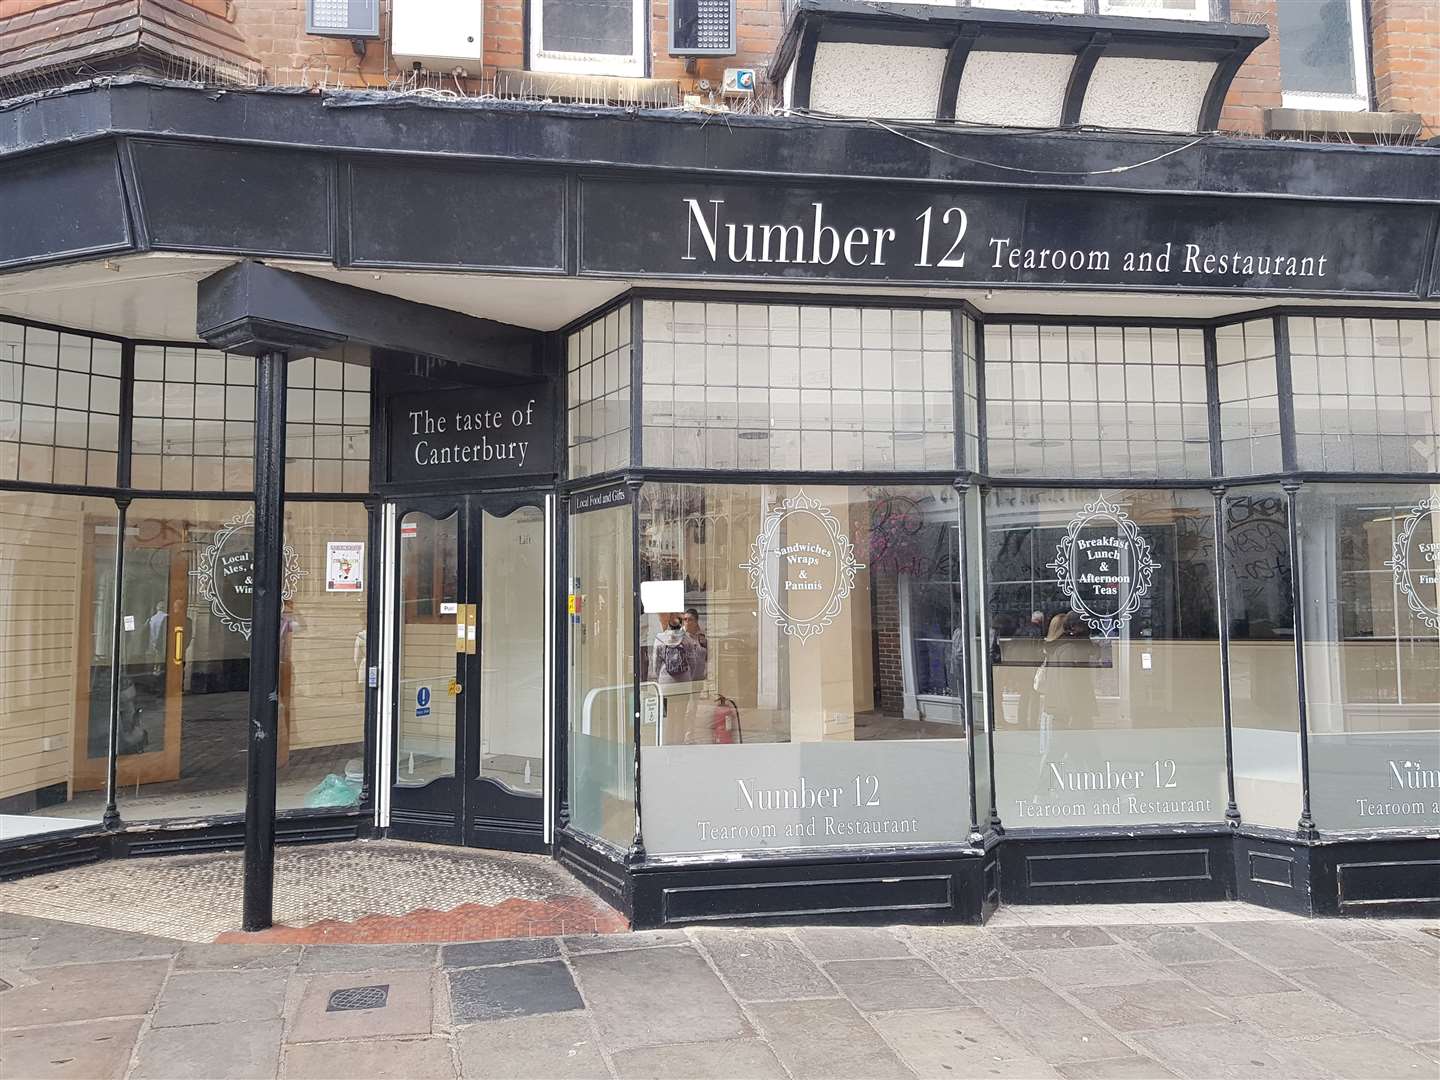 The Number 12 Tearoom closed in January